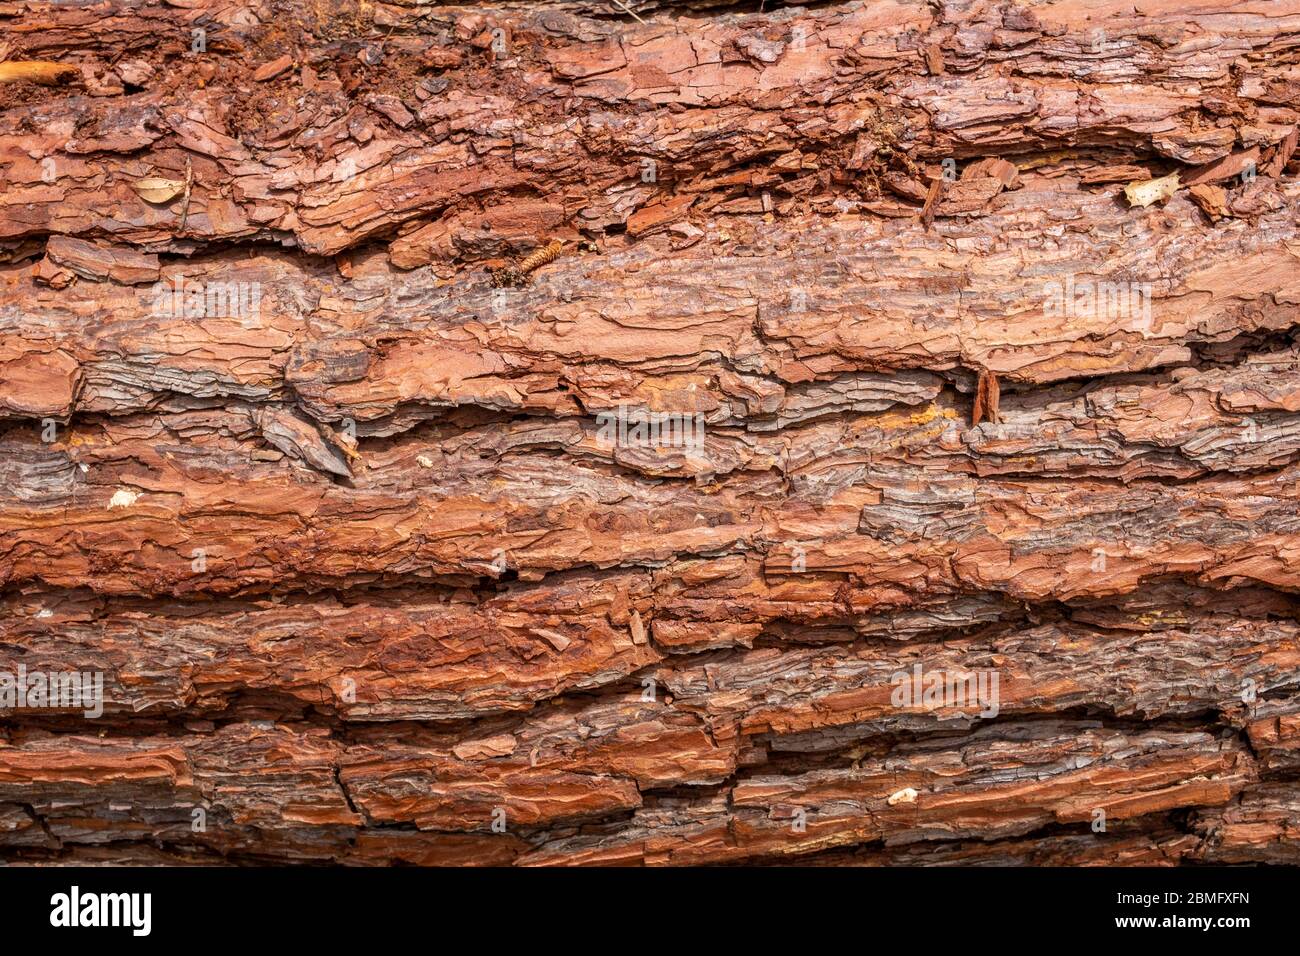 Bark detail from pine tree trunk. Stock Photo